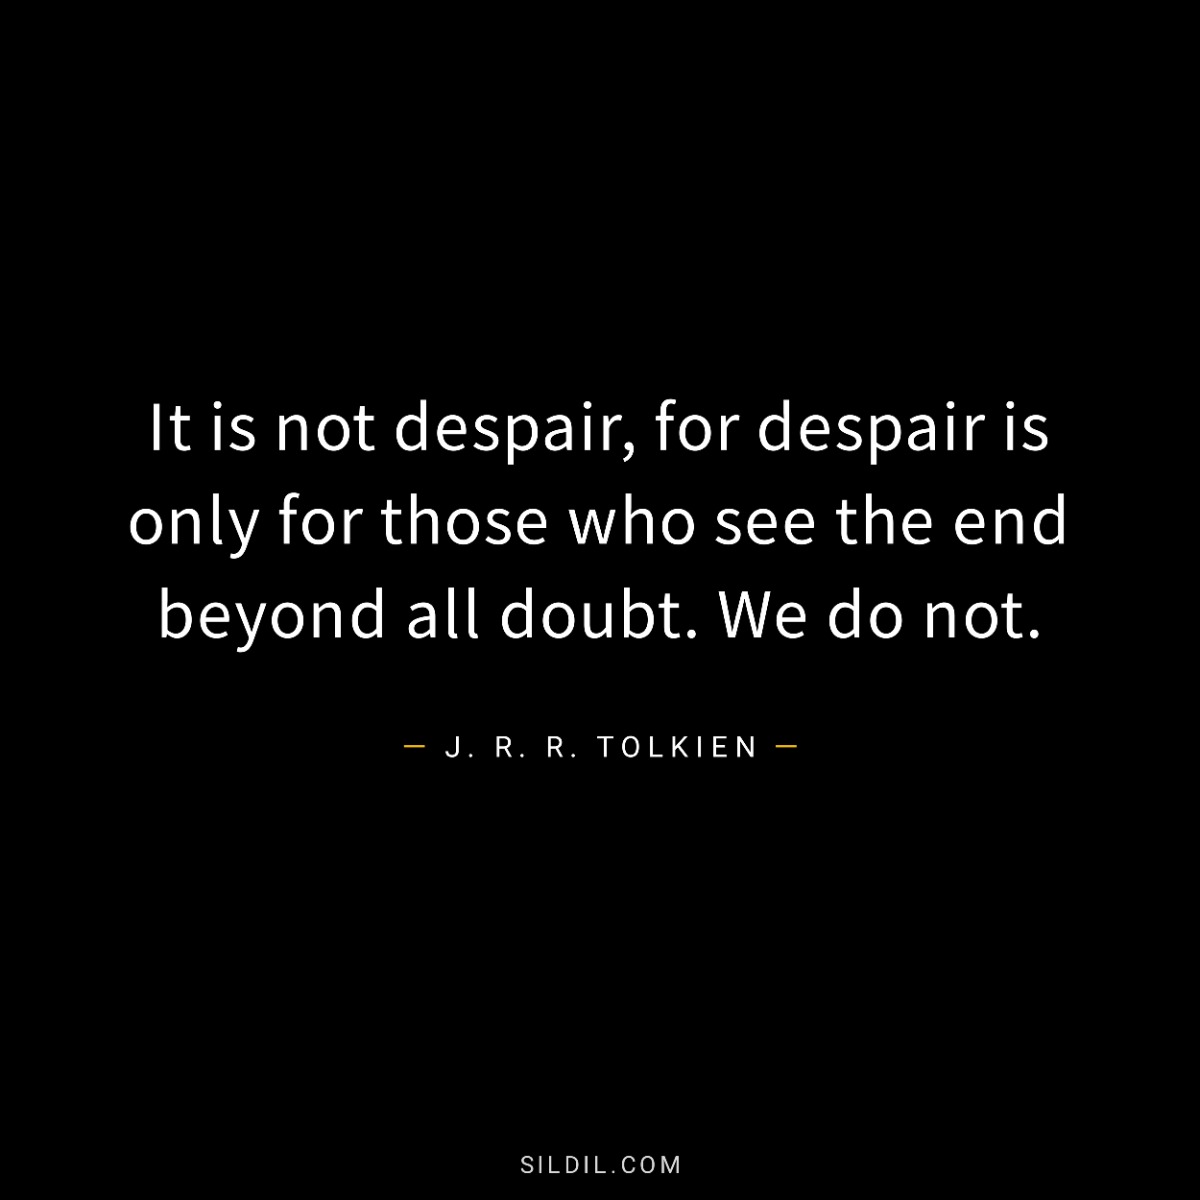 It is not despair, for despair is only for those who see the end beyond all doubt. We do not.